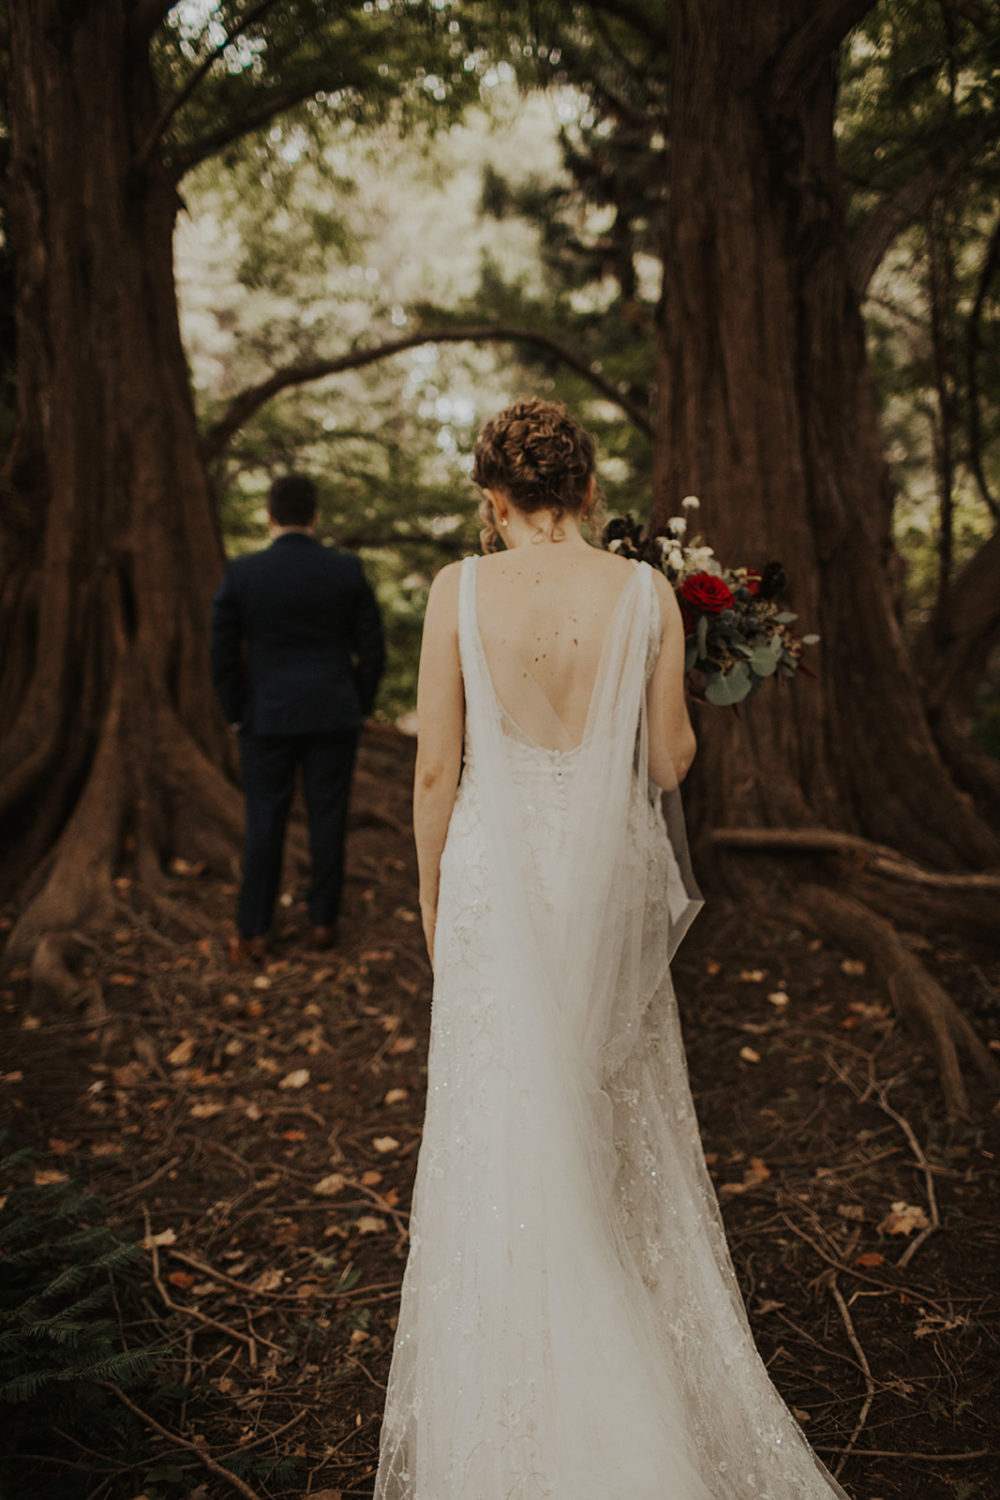 Bride walks through forest holding wedding bouquet for first look